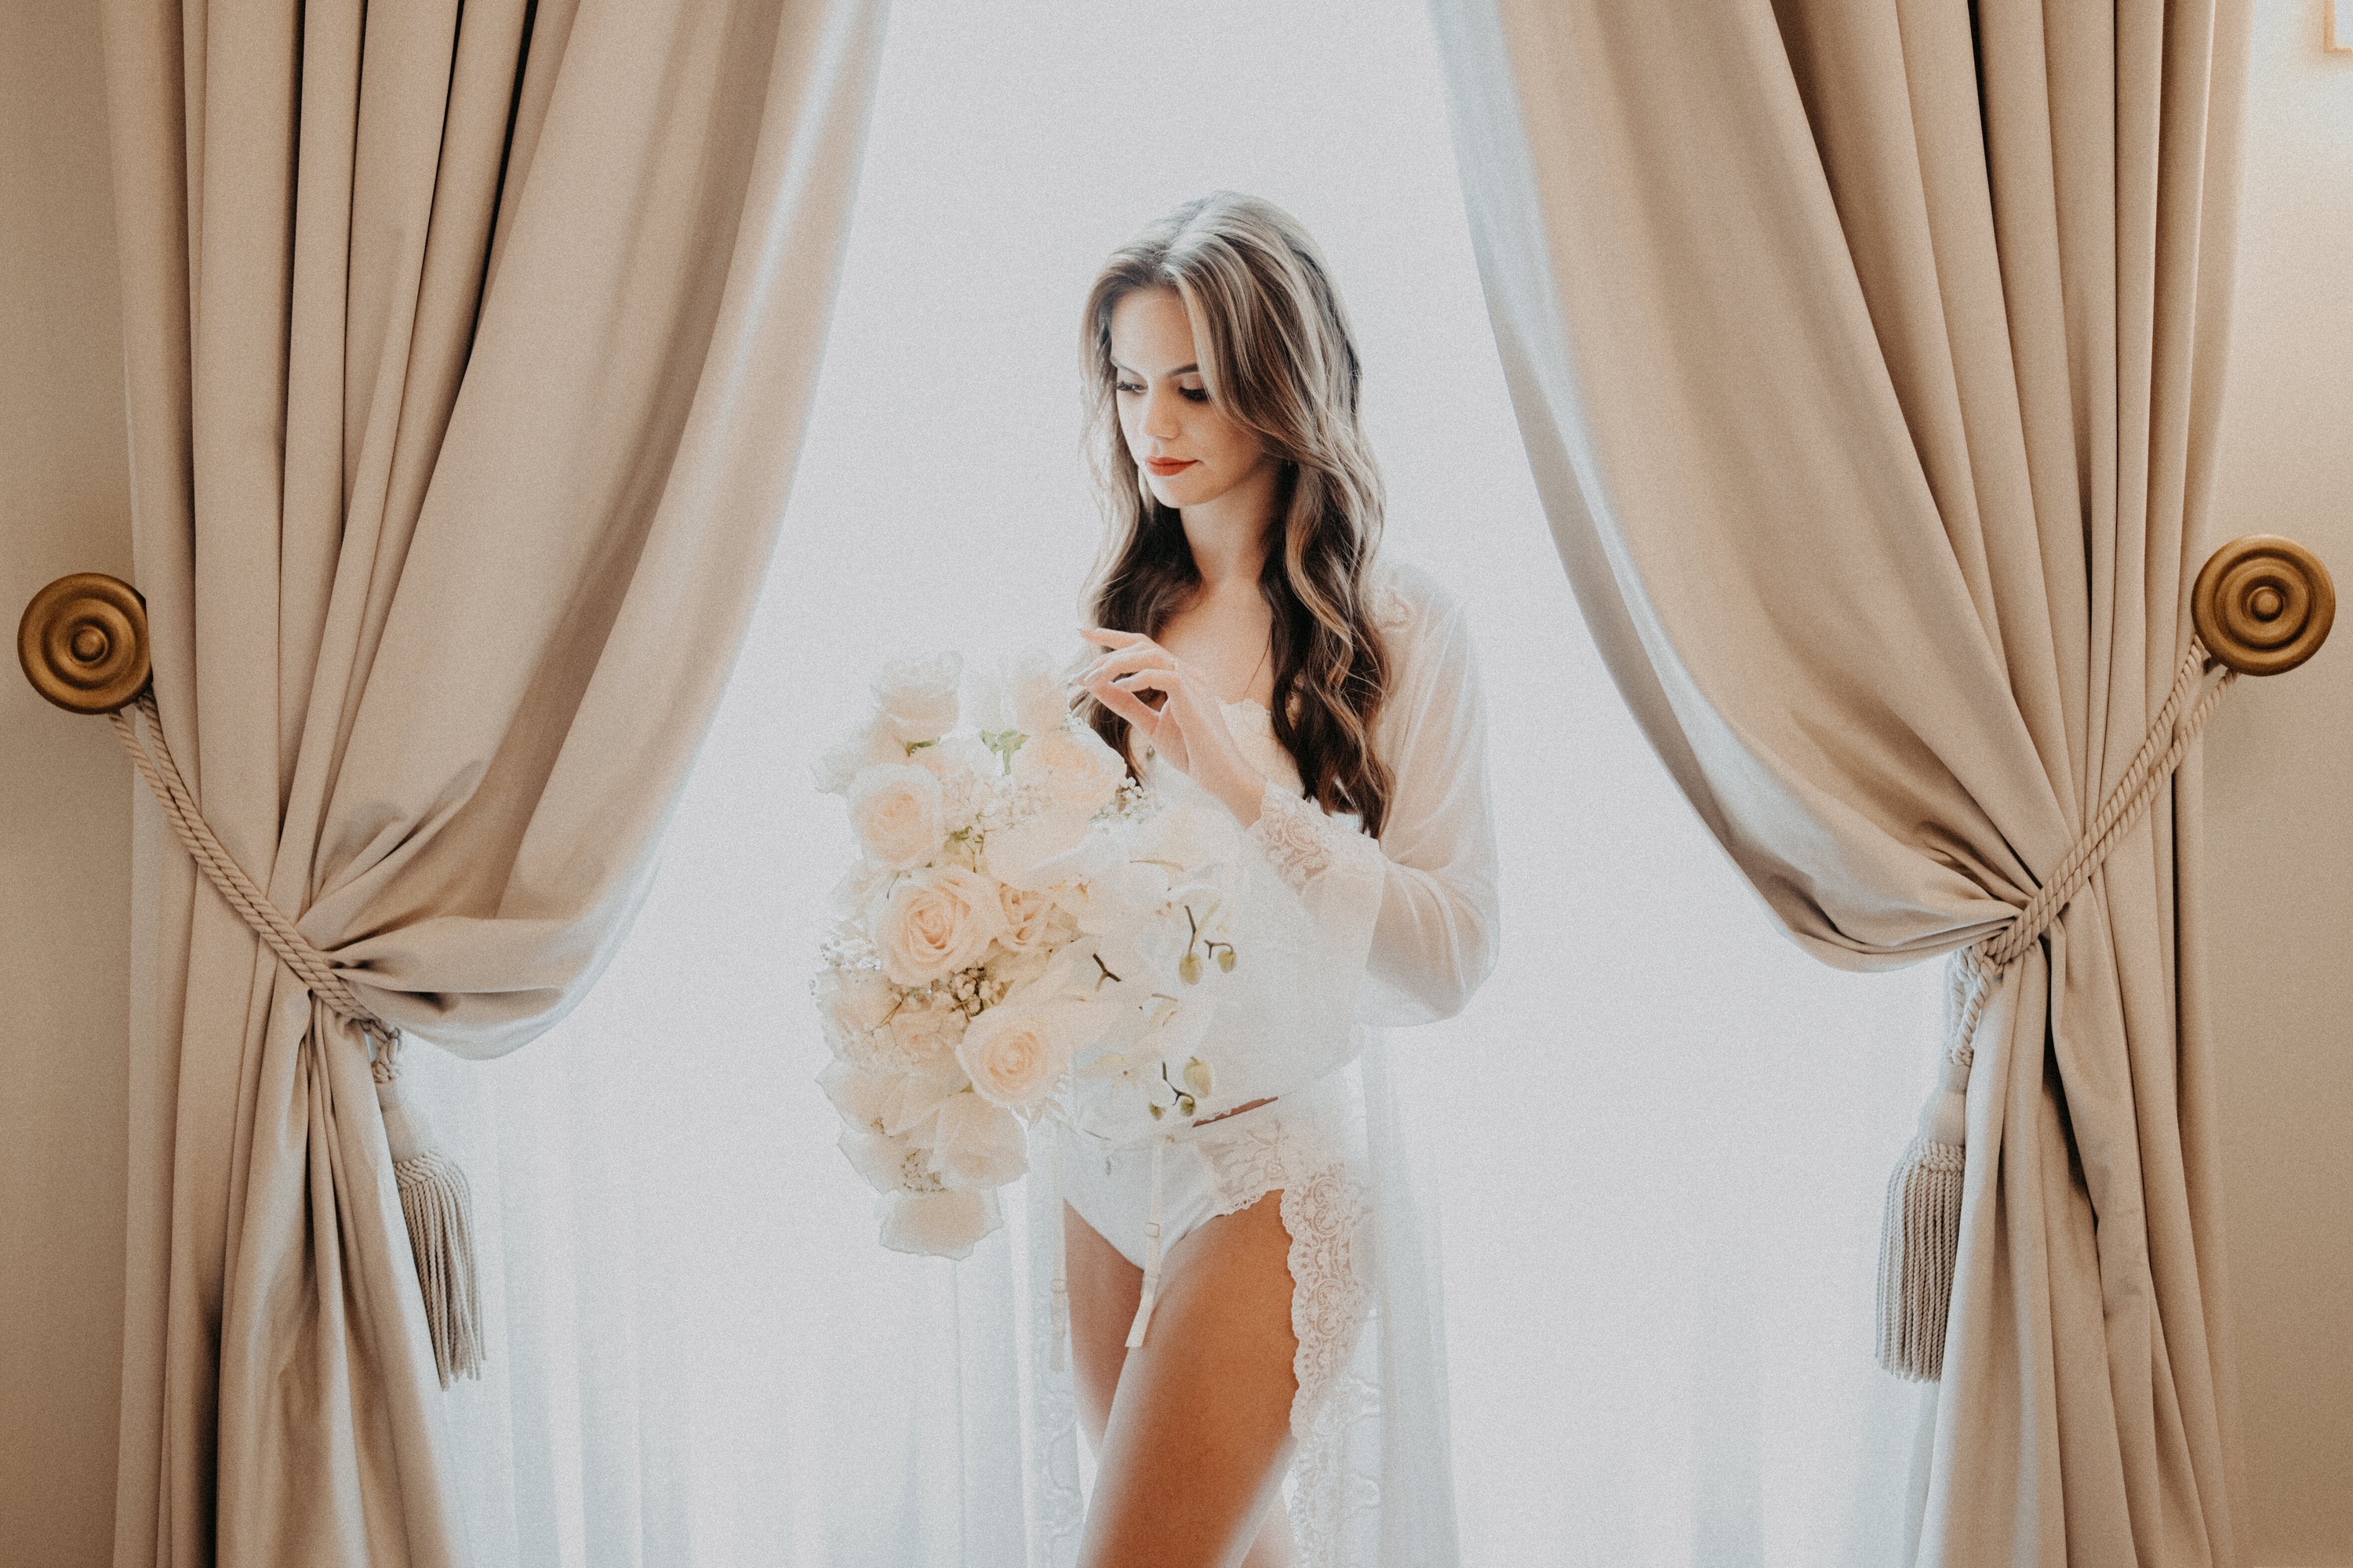 a woman in lingerie is holding a bouquet of white roses